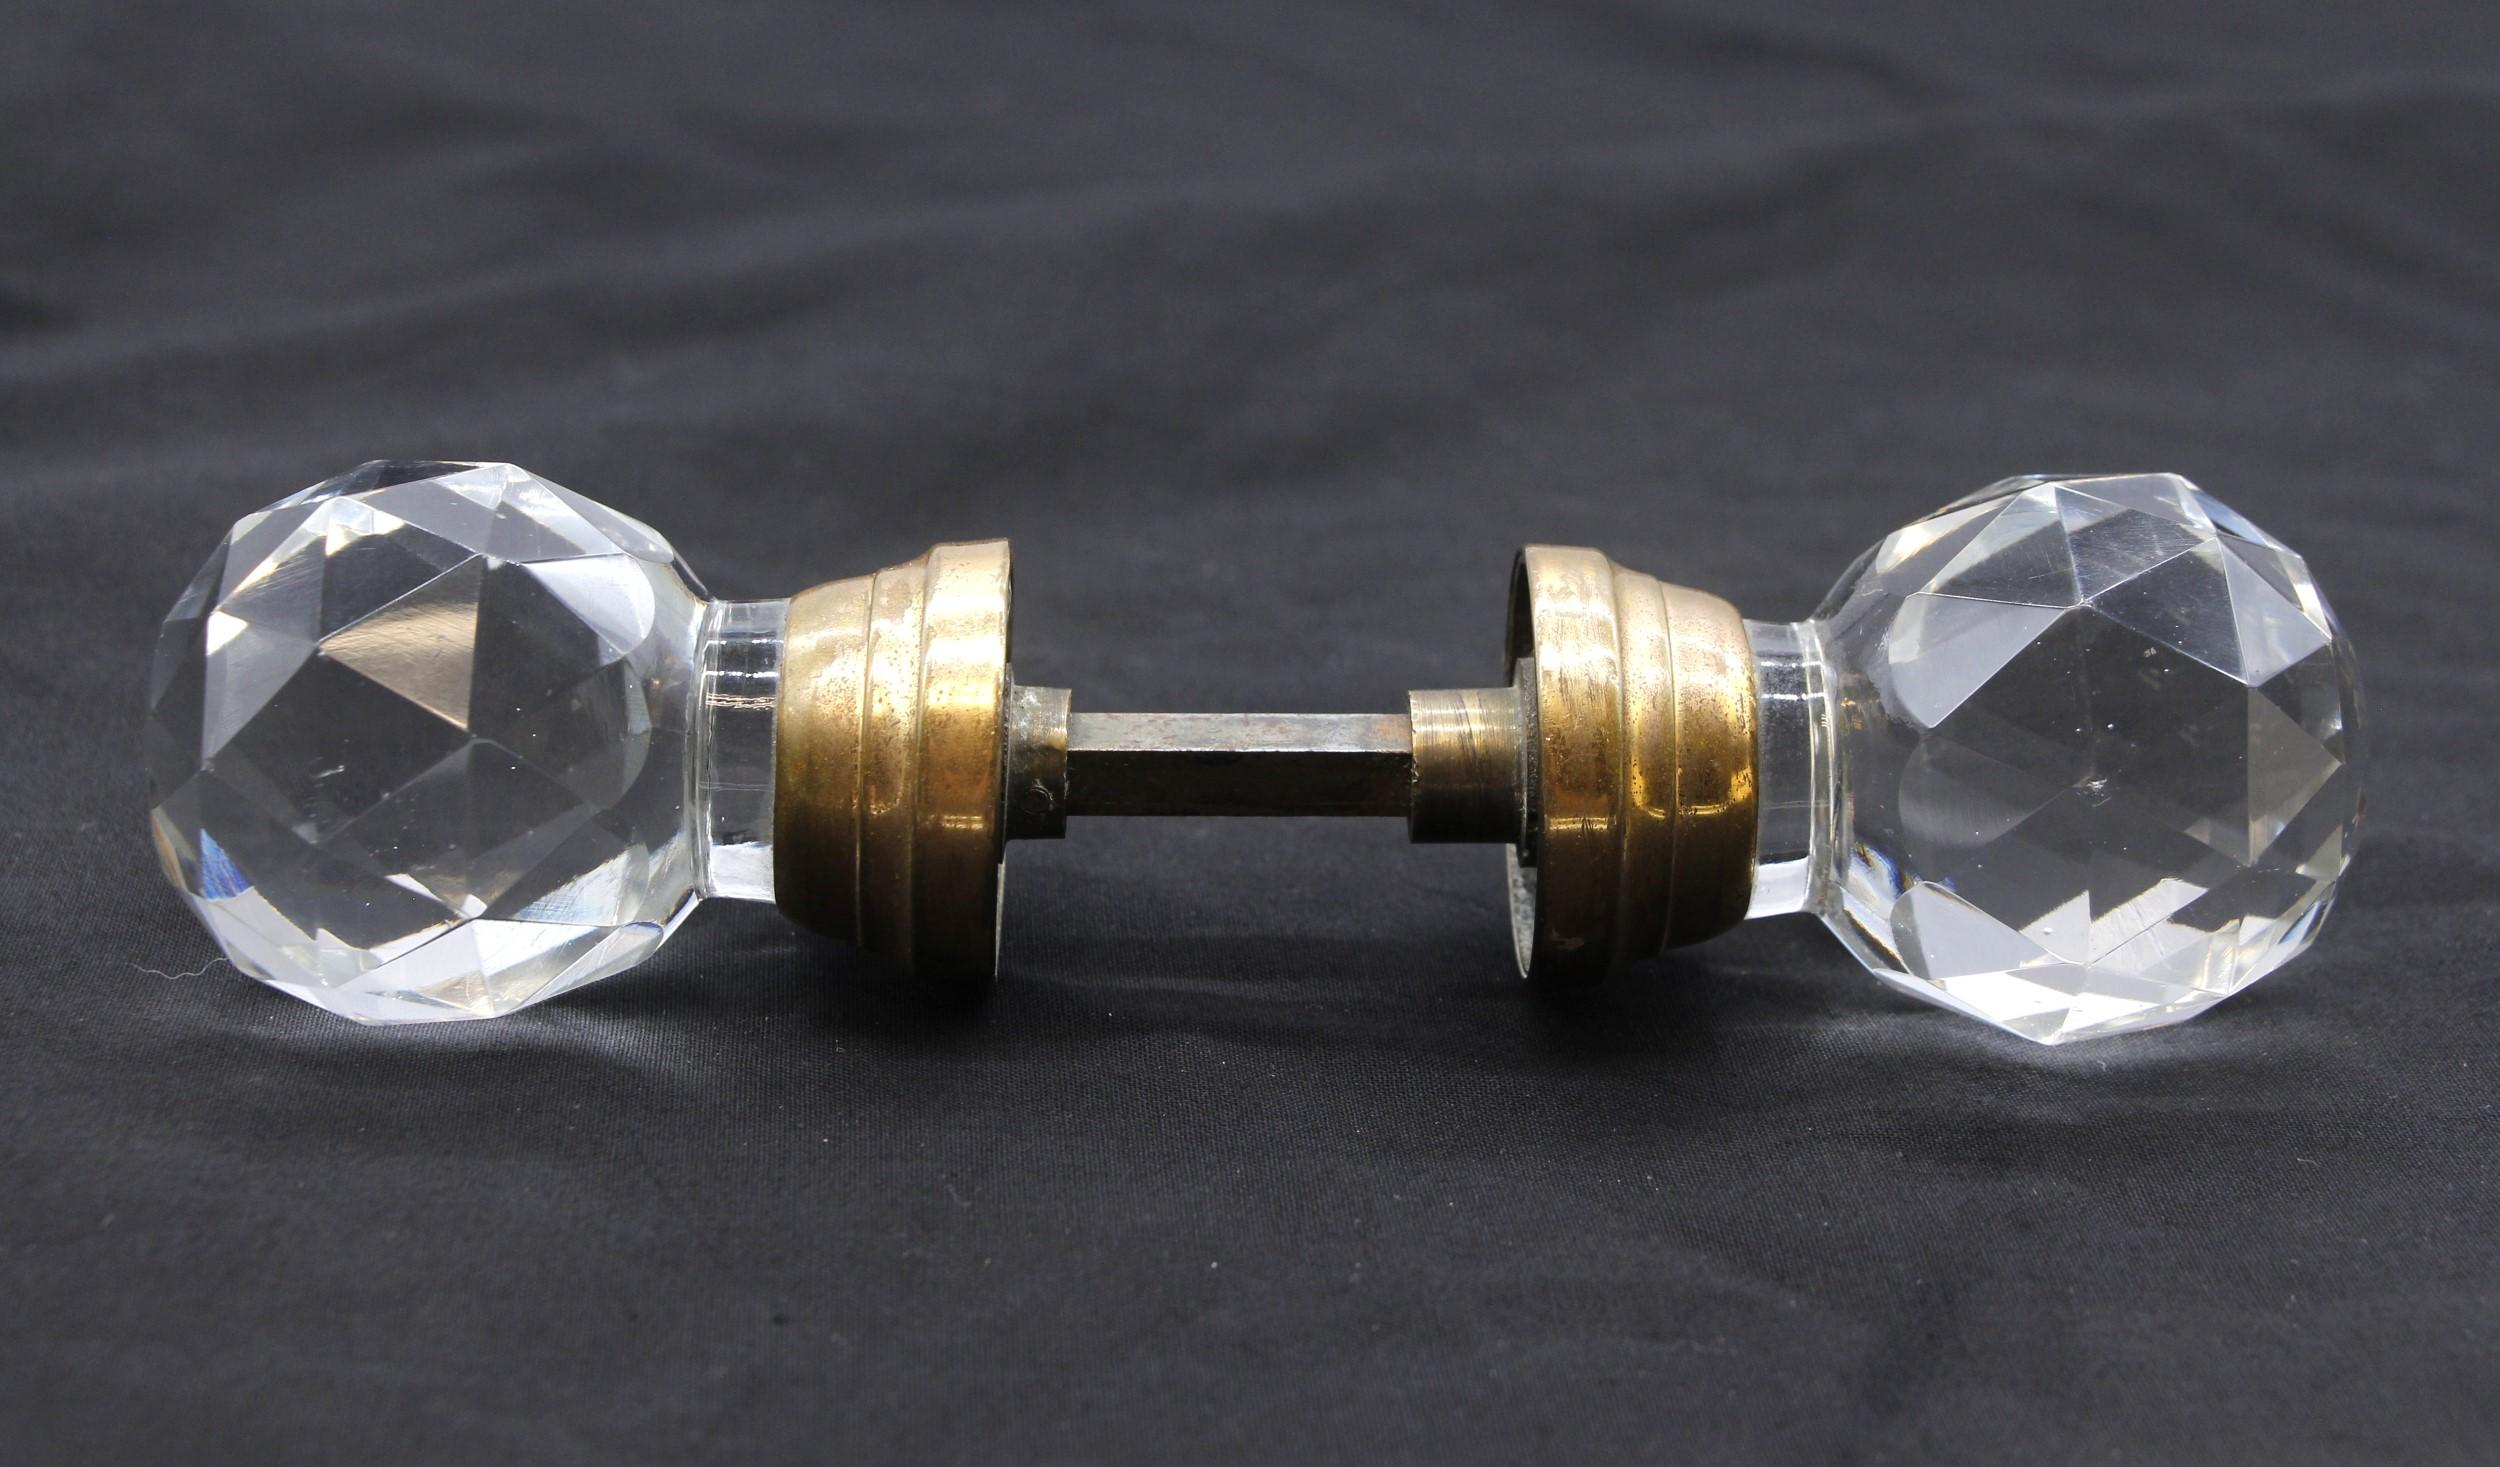 American Pair of Round Faceted Diamond Cut Glass Doorknobs Antique 